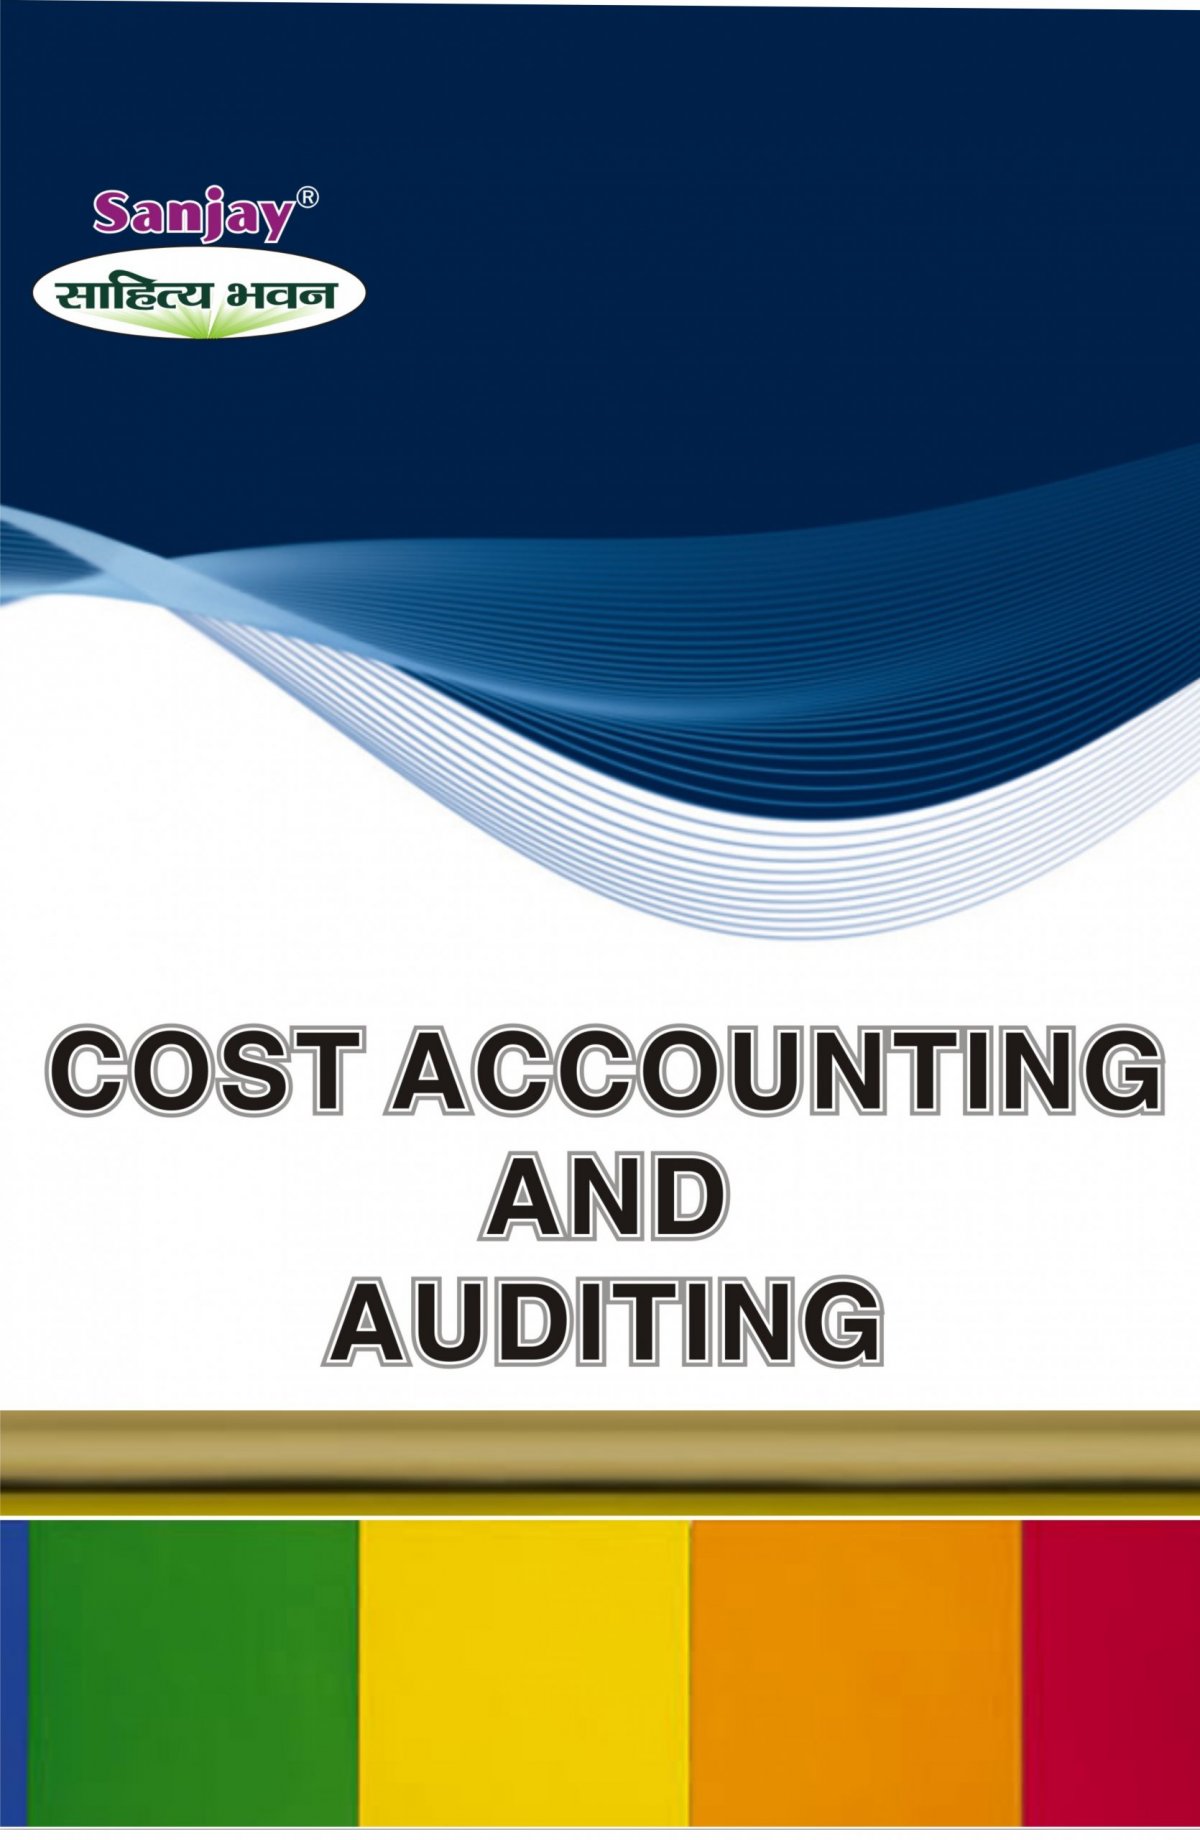 Cost Accounting and Auditing